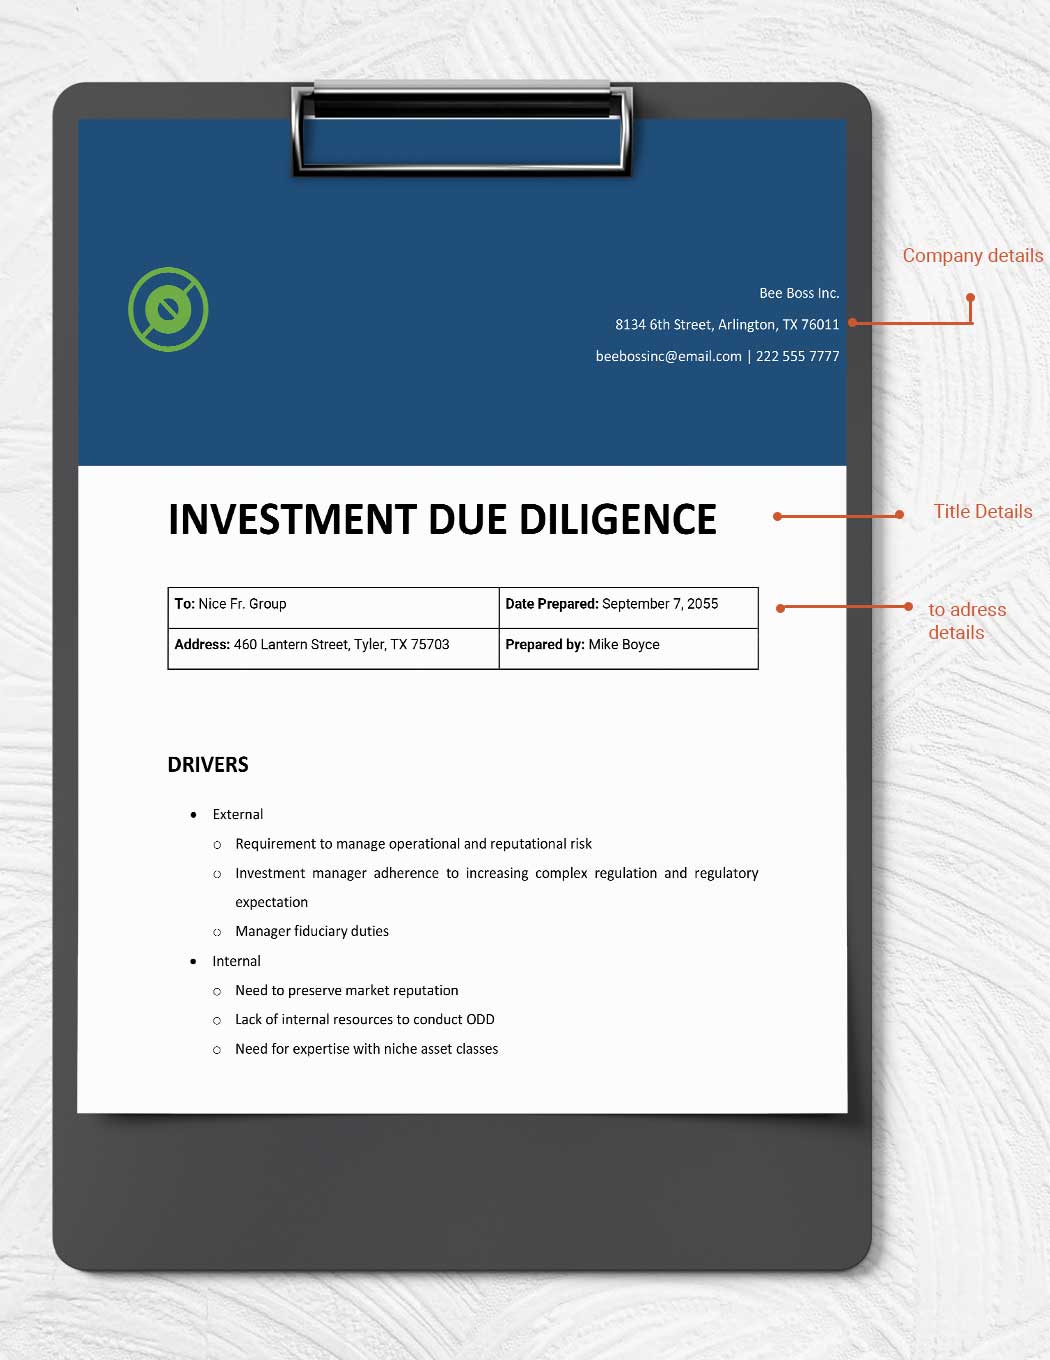 Investment Due Diligence